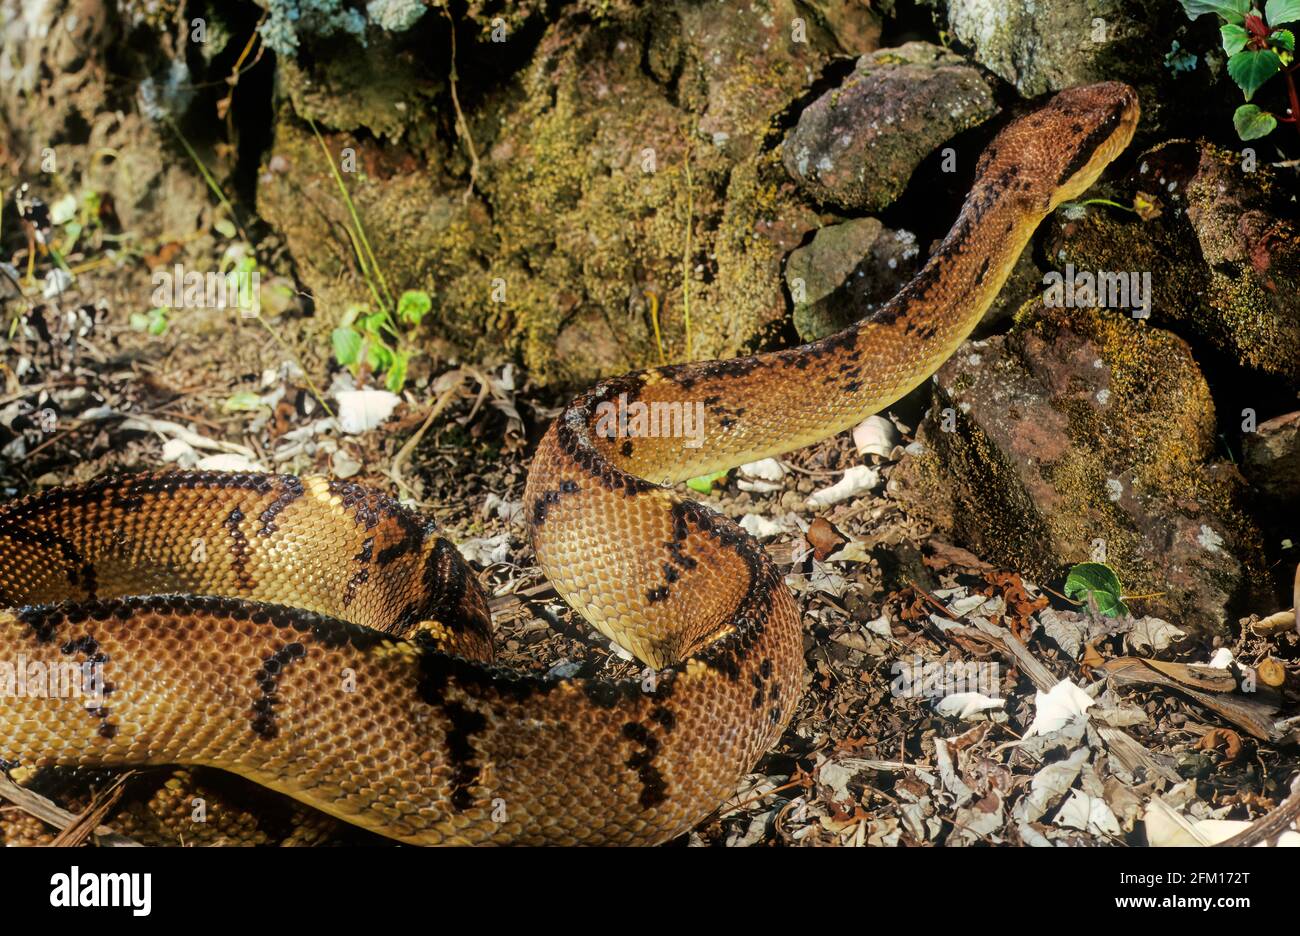 Lachesis muta, also known as the Southern American bushmaster or Atlantic bushmaster, is a venomous pit viper species found in South America. Stock Photo